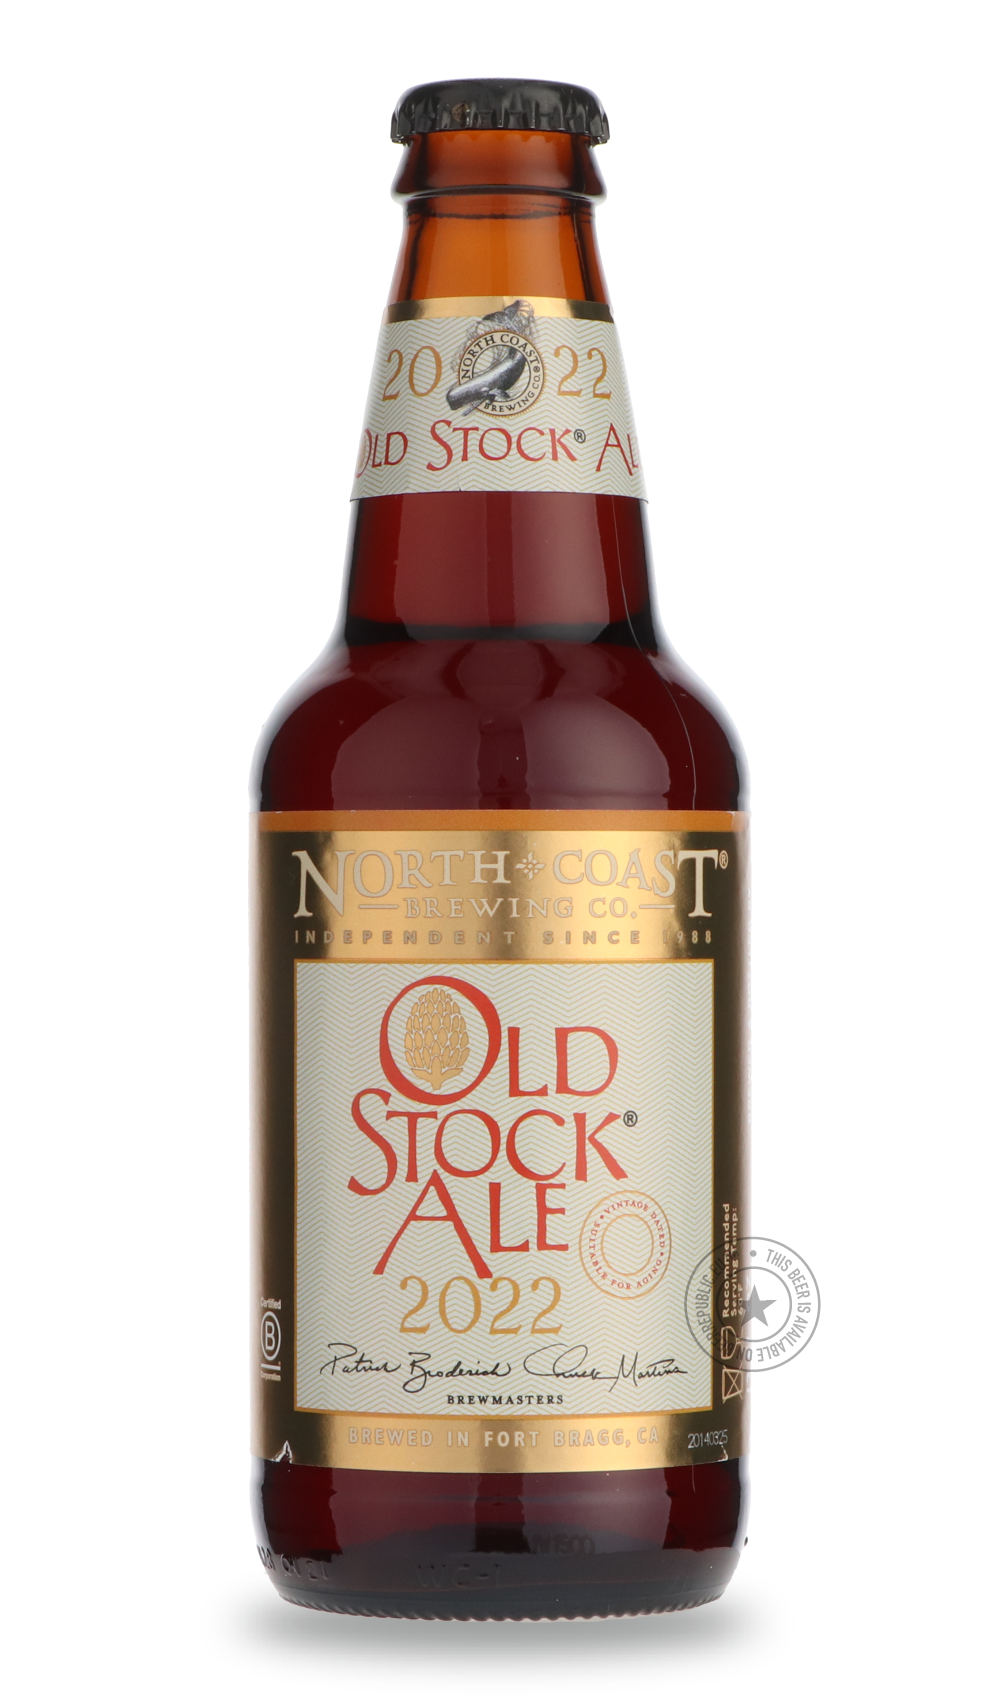 -North Coast- Old Stock Ale-Brown & Dark- Only @ Beer Republic - The best online beer store for American & Canadian craft beer - Buy beer online from the USA and Canada - Bier online kopen - Amerikaans bier kopen - Craft beer store - Craft beer kopen - Amerikanisch bier kaufen - Bier online kaufen - Acheter biere online - IPA - Stout - Porter - New England IPA - Hazy IPA - Imperial Stout - Barrel Aged - Barrel Aged Imperial Stout - Brown - Dark beer - Blond - Blonde - Pilsner - Lager - Wheat - Weizen - Ambe